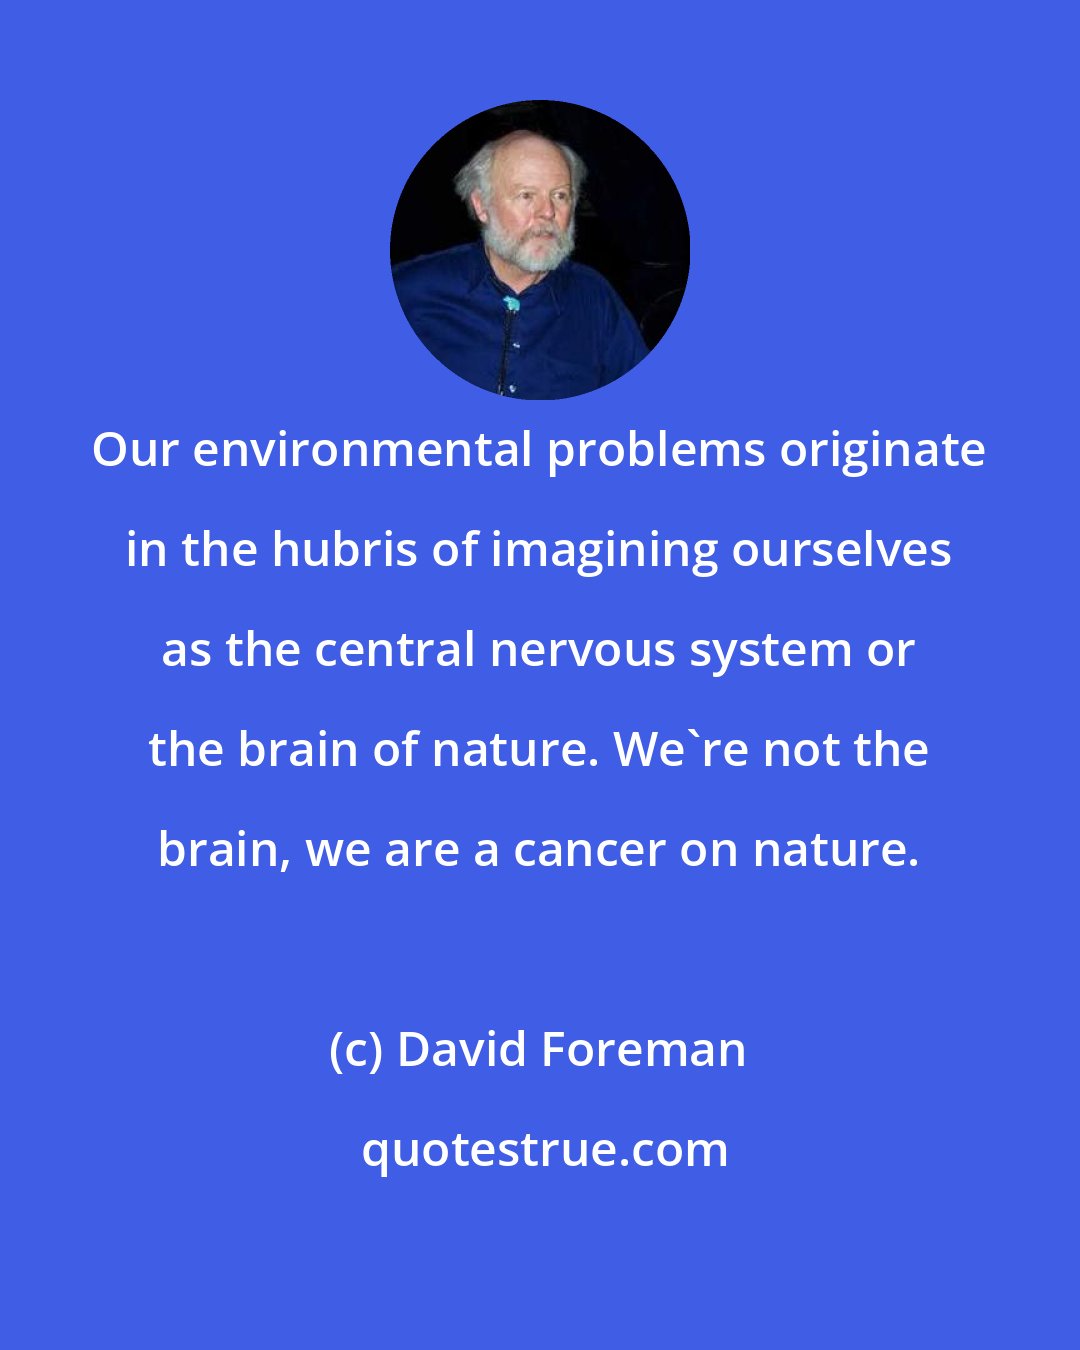 David Foreman: Our environmental problems originate in the hubris of imagining ourselves as the central nervous system or the brain of nature. We're not the brain, we are a cancer on nature.